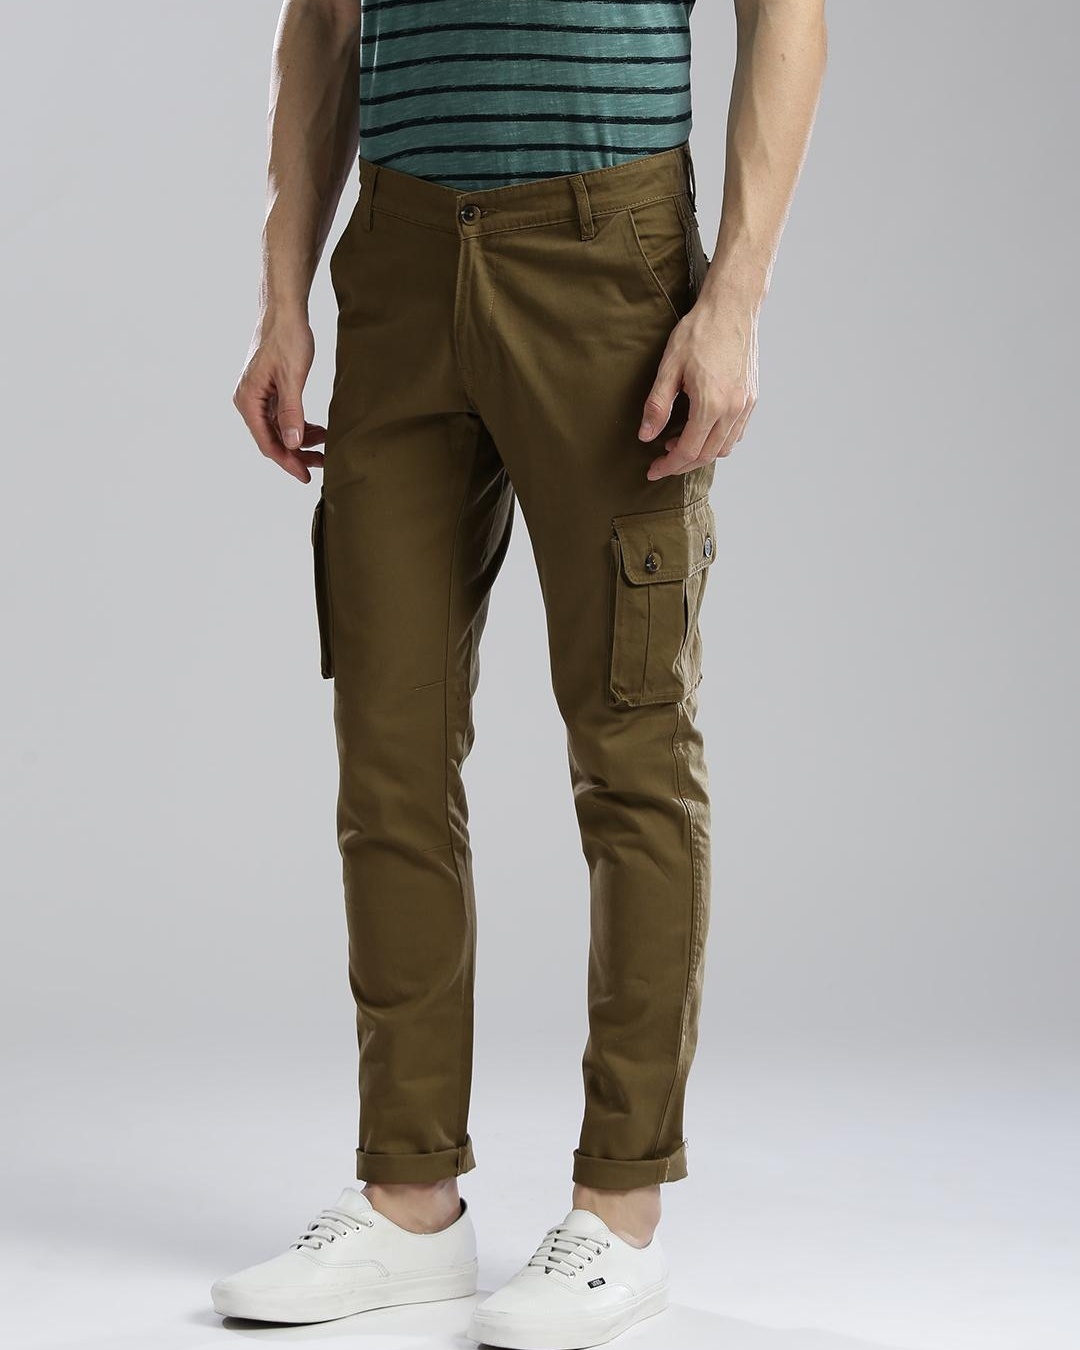 Hubberholme Cargo Trousers & Pants for Men sale - discounted price |  FASHIOLA INDIA